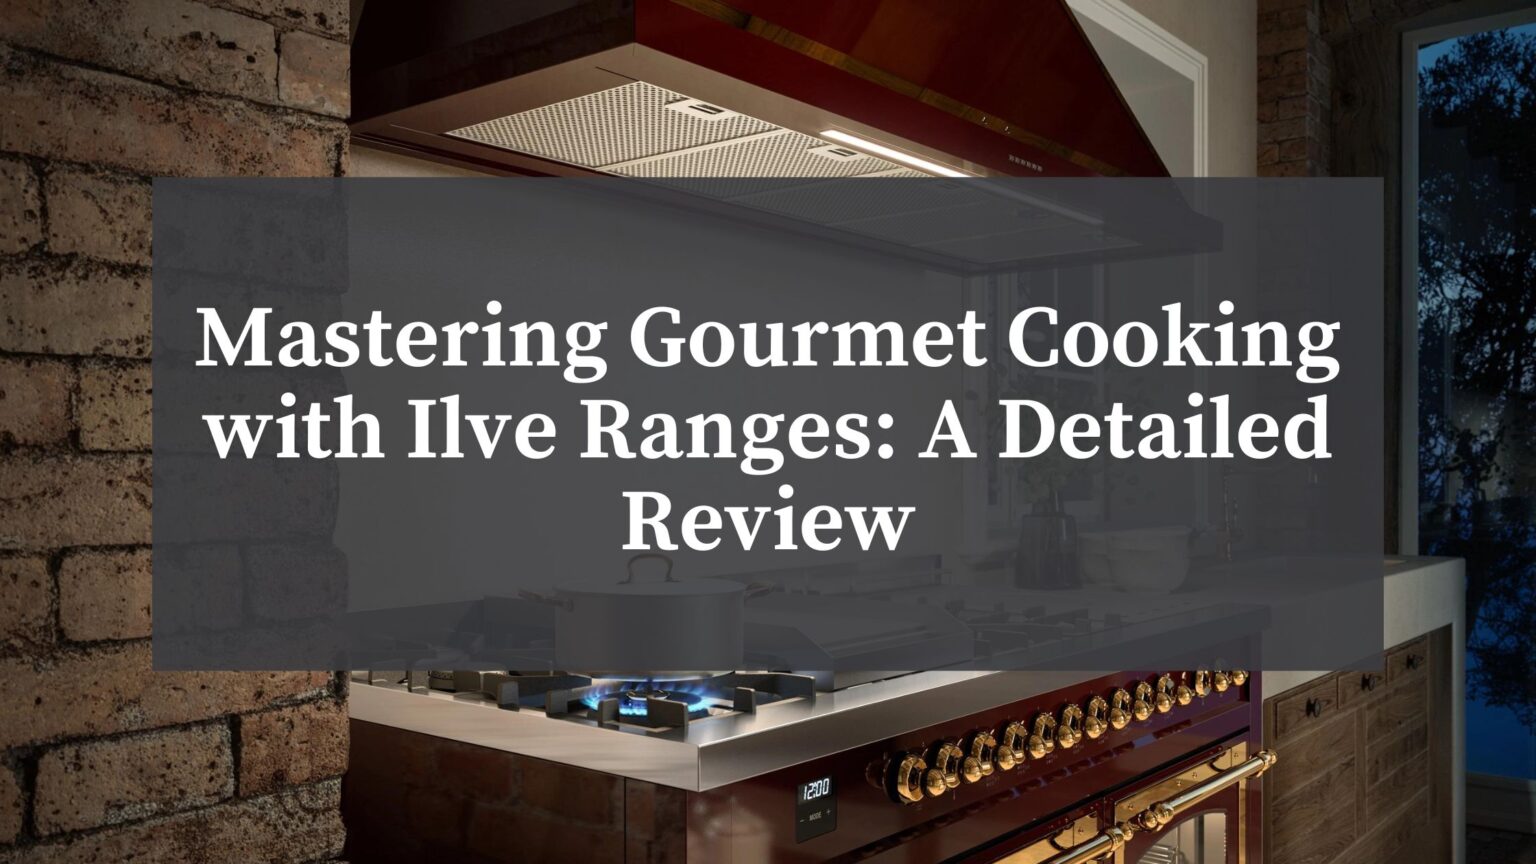 Atherton - Mastering Gourmet Cooking with Ilve Ranges A Detailed Review